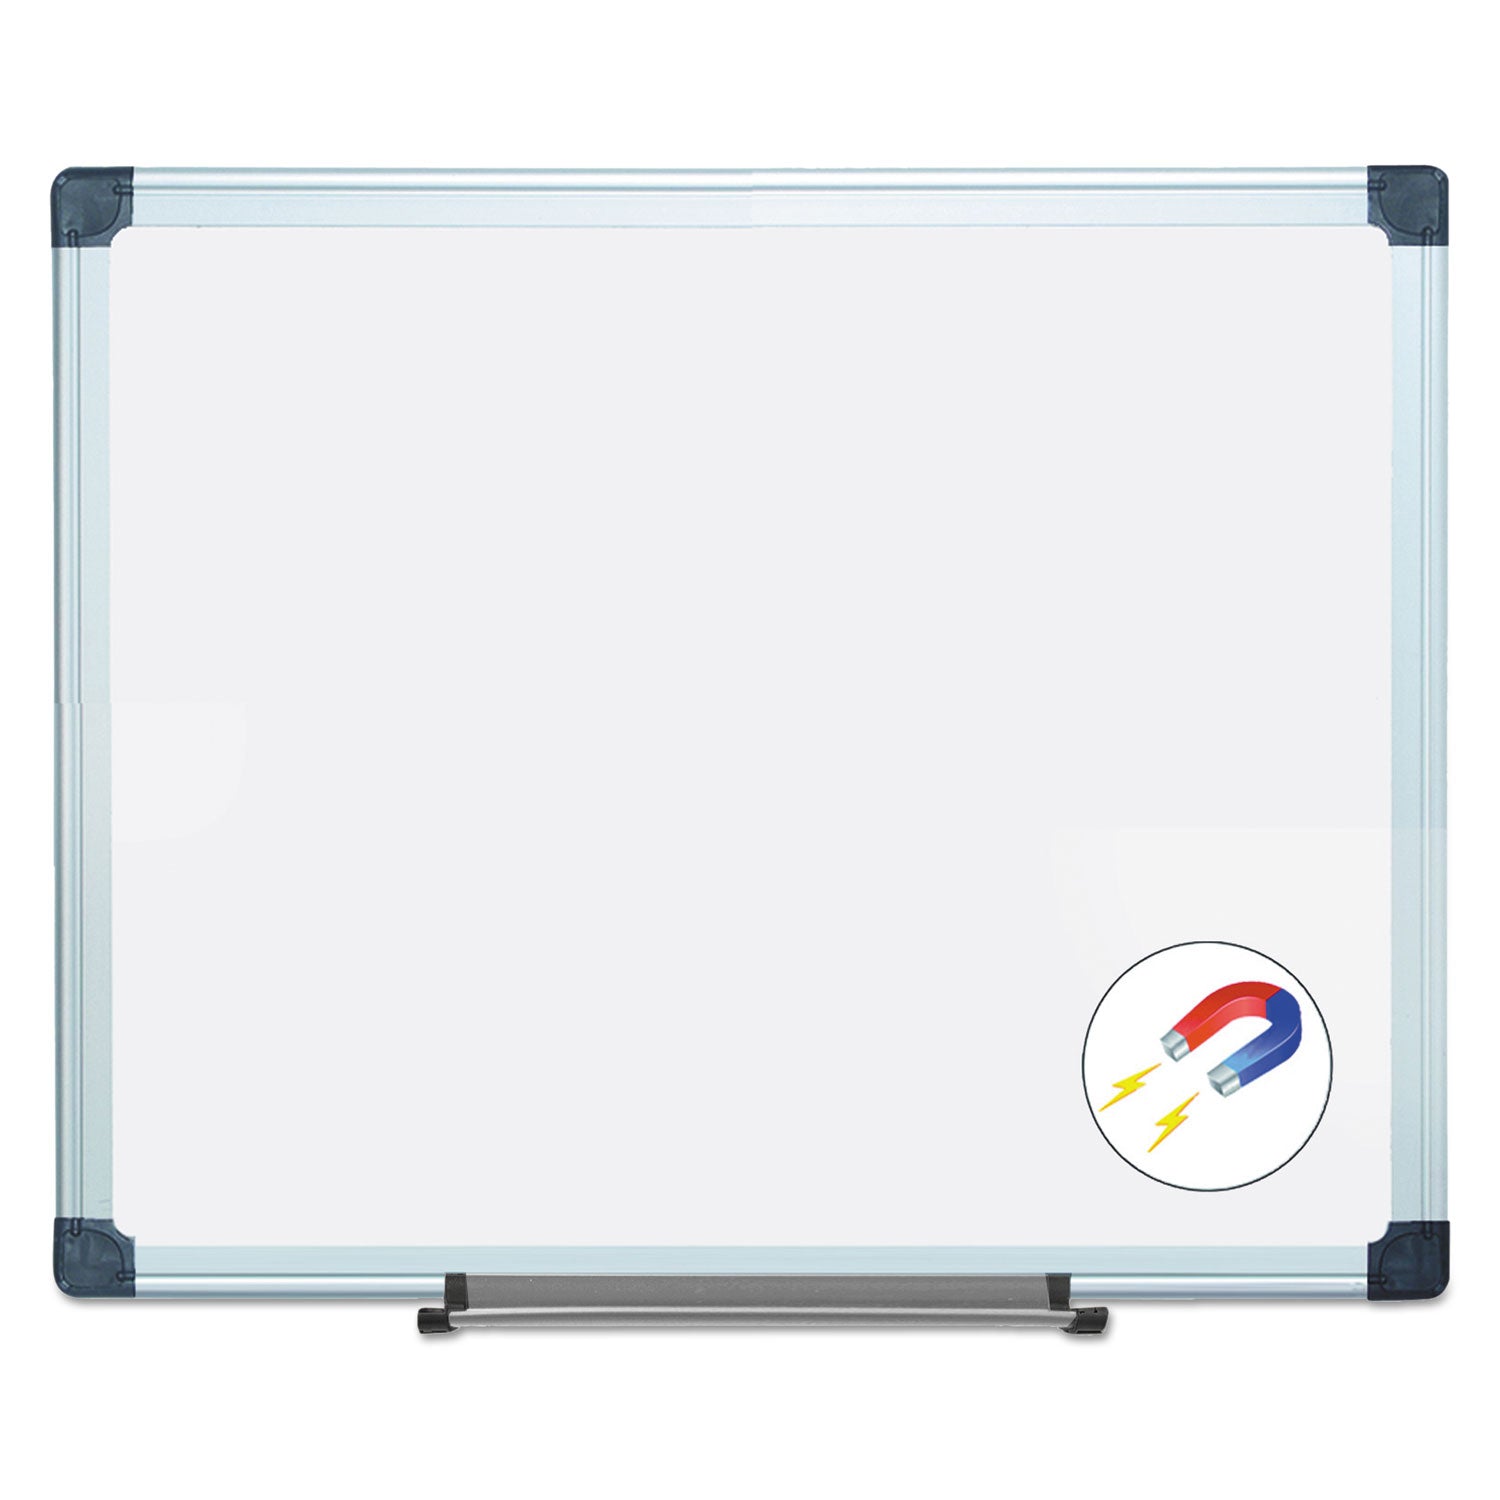 Value Lacquered Steel Magnetic Dry Erase Board, 24 x 36, White Surface, Silver Aluminum Frame - 